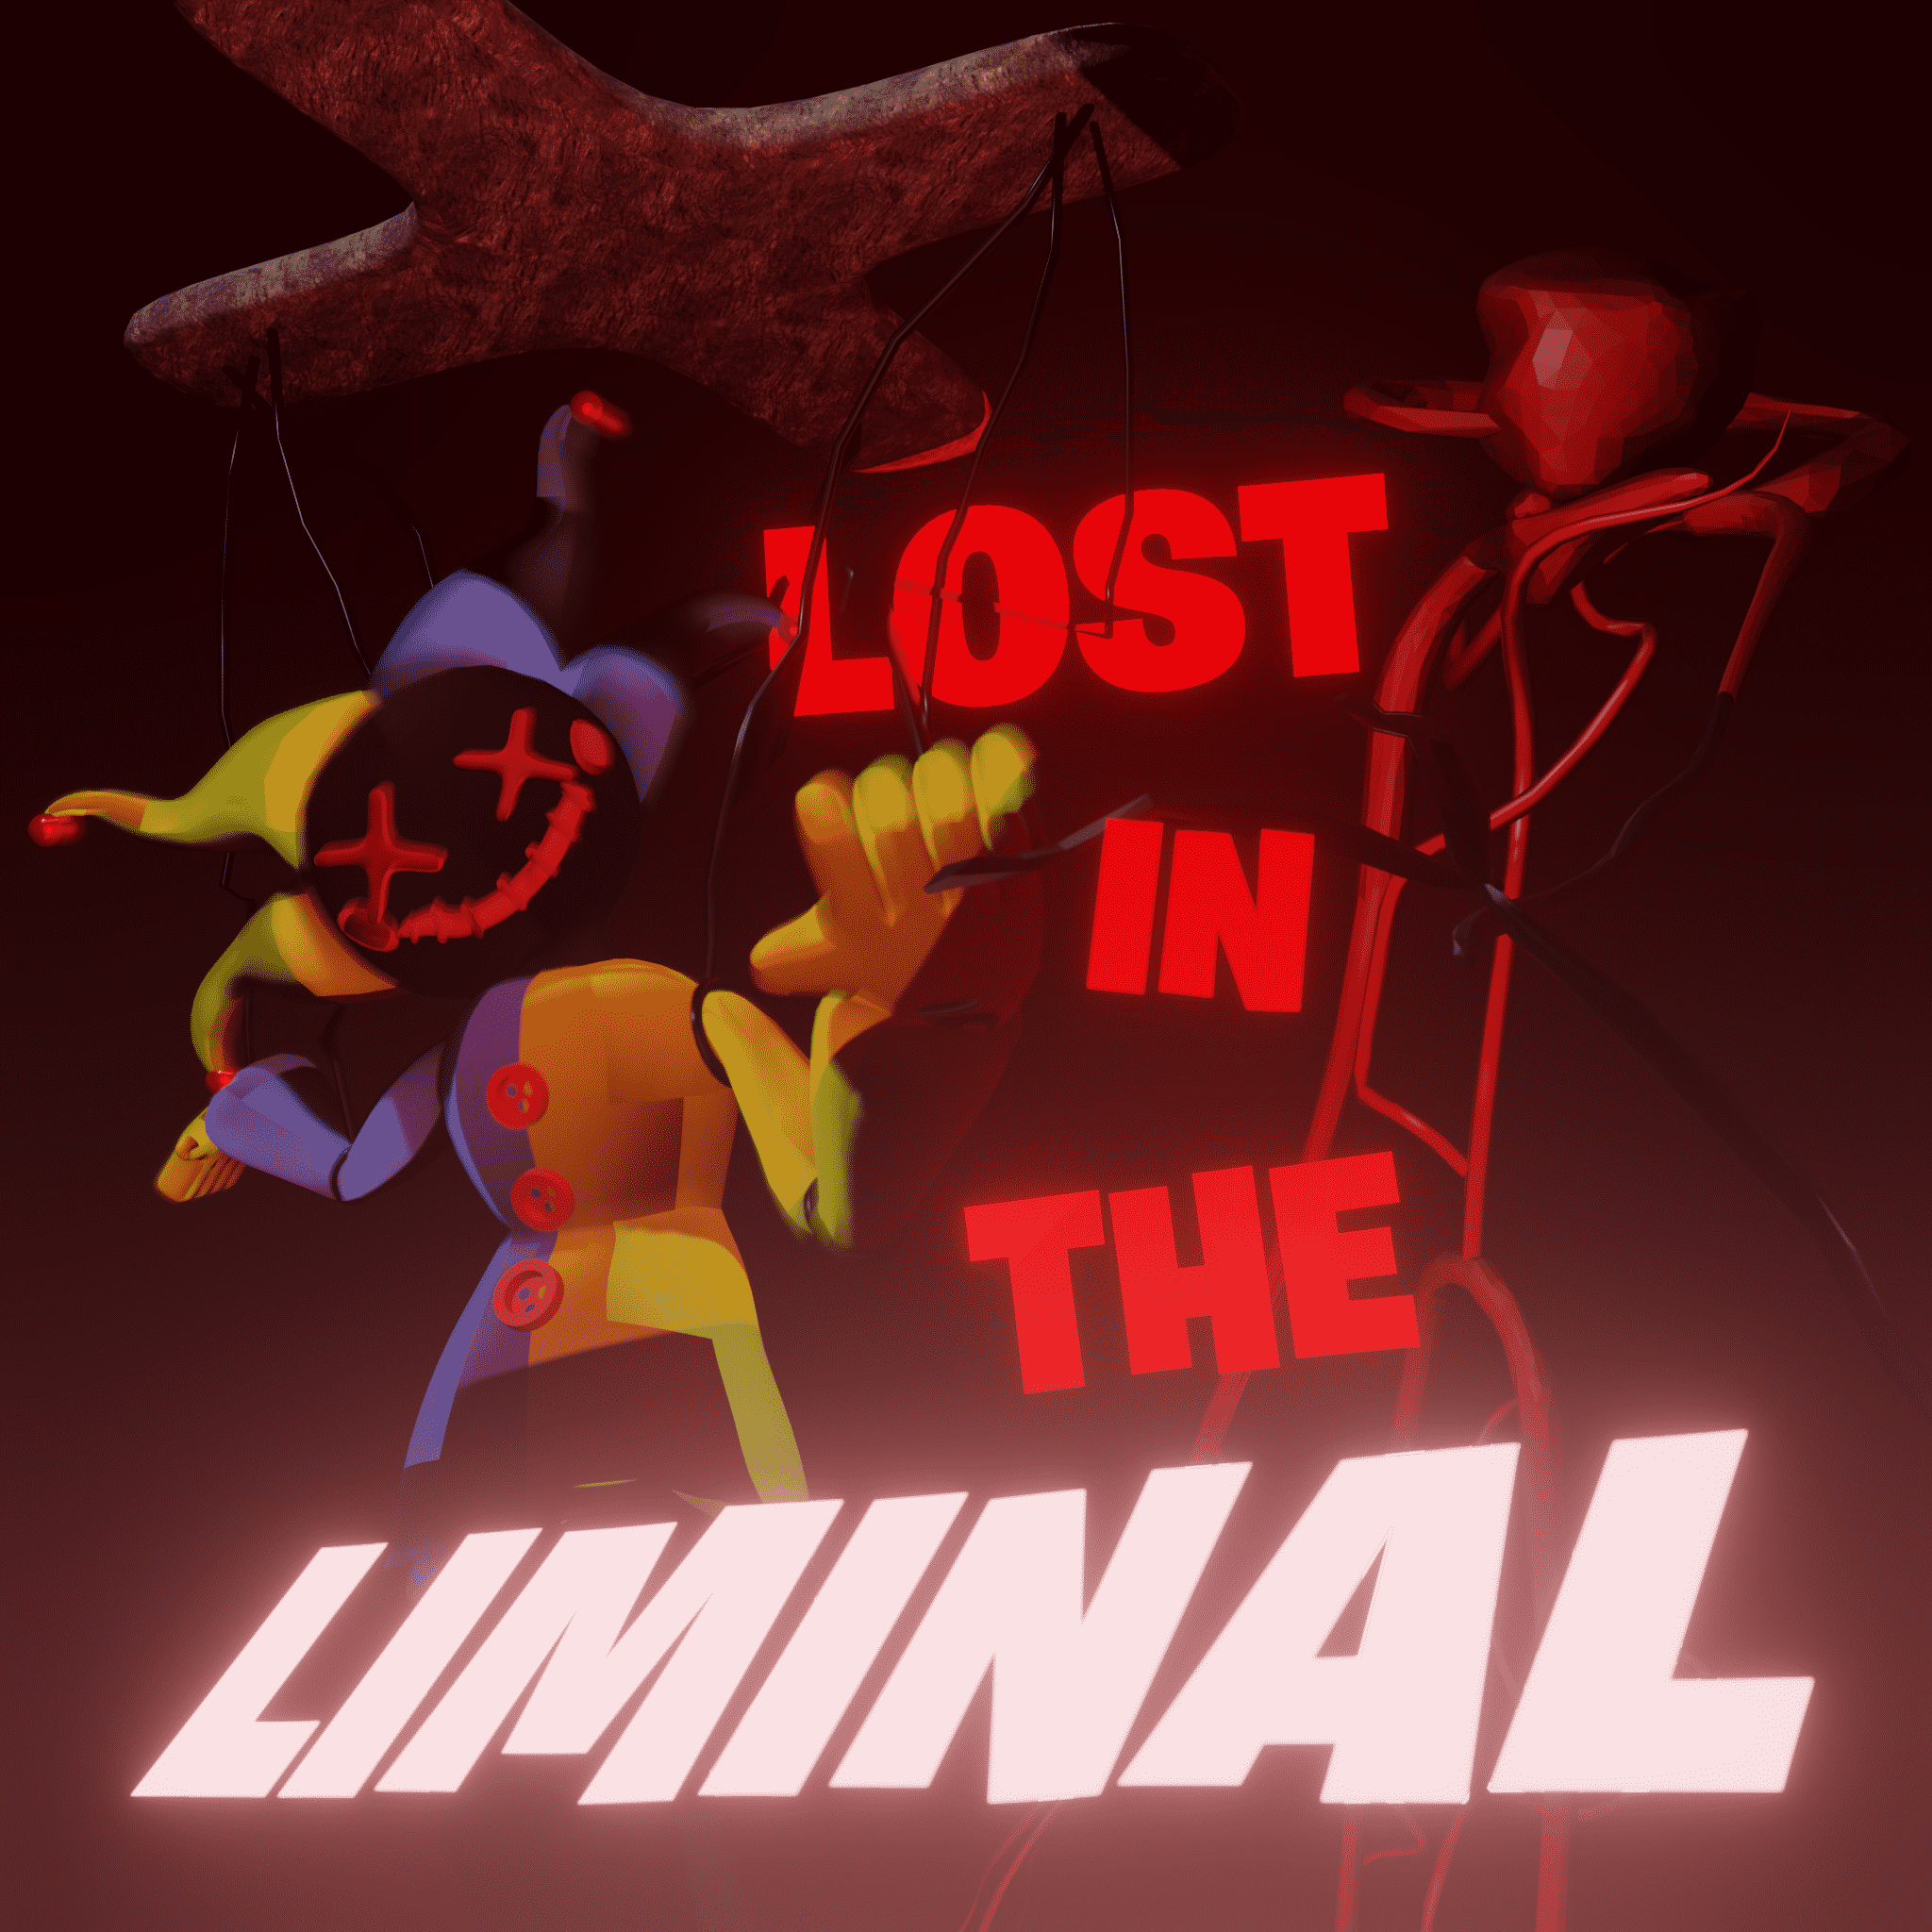 Lost In The Liminal [ sinport ] – Fortnite Creative Map Code